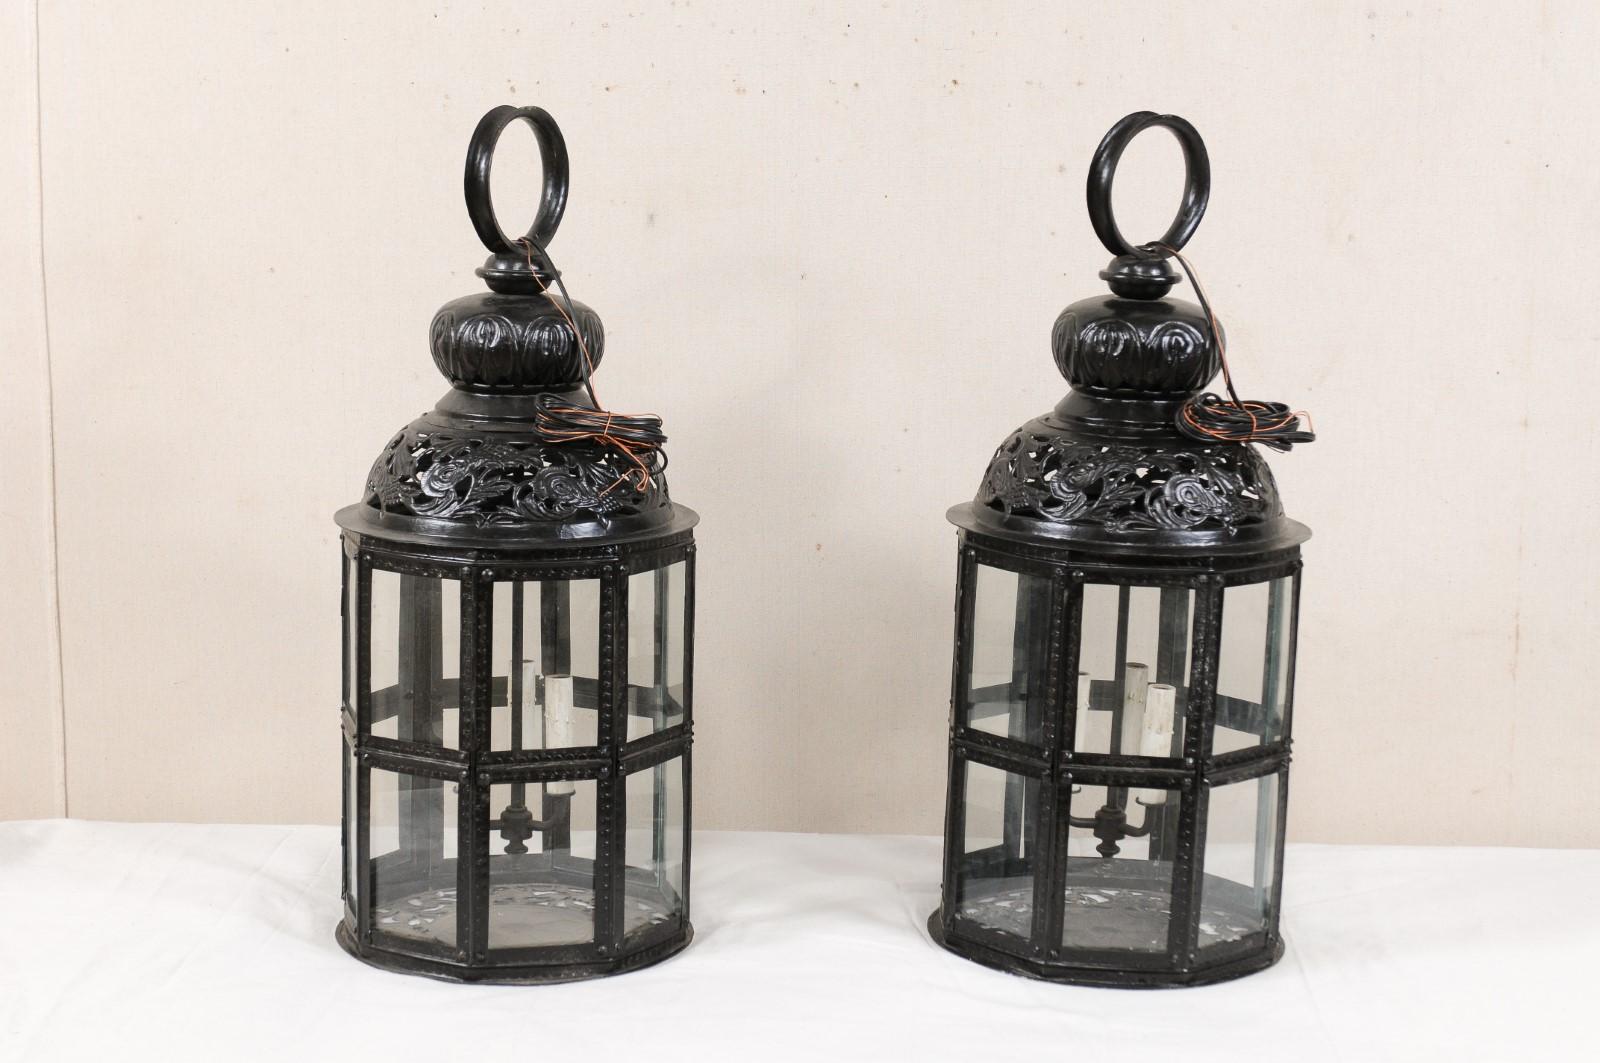 Pair of Three-Light Moroccan-Inspired European Lanterns in Black Color w/Glass In Good Condition For Sale In Atlanta, GA